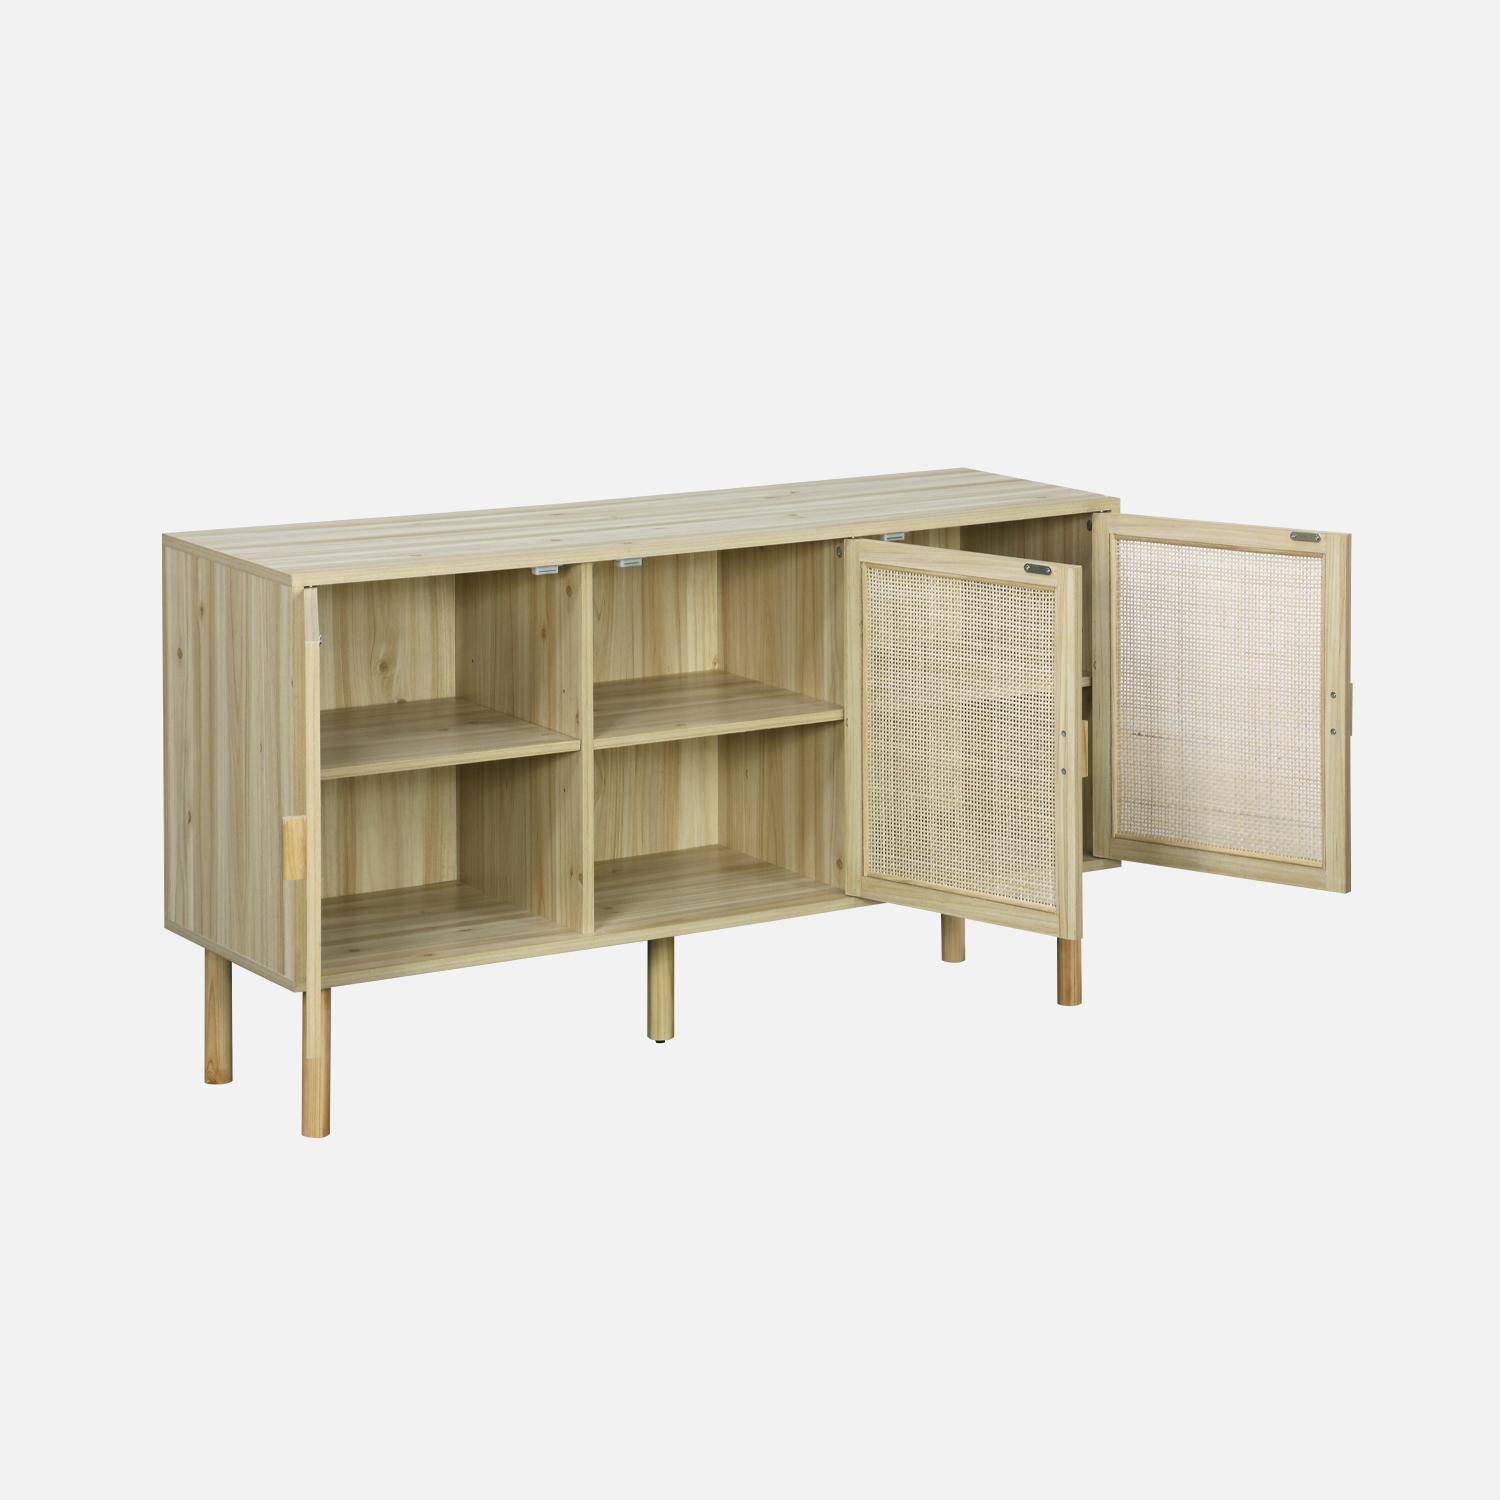 3-door sideboard with 3 shelves in cane and wood effect. Fir wood legs and handles. W 120 x D 39 x H 70cm CAMARGUE,sweeek,Photo3